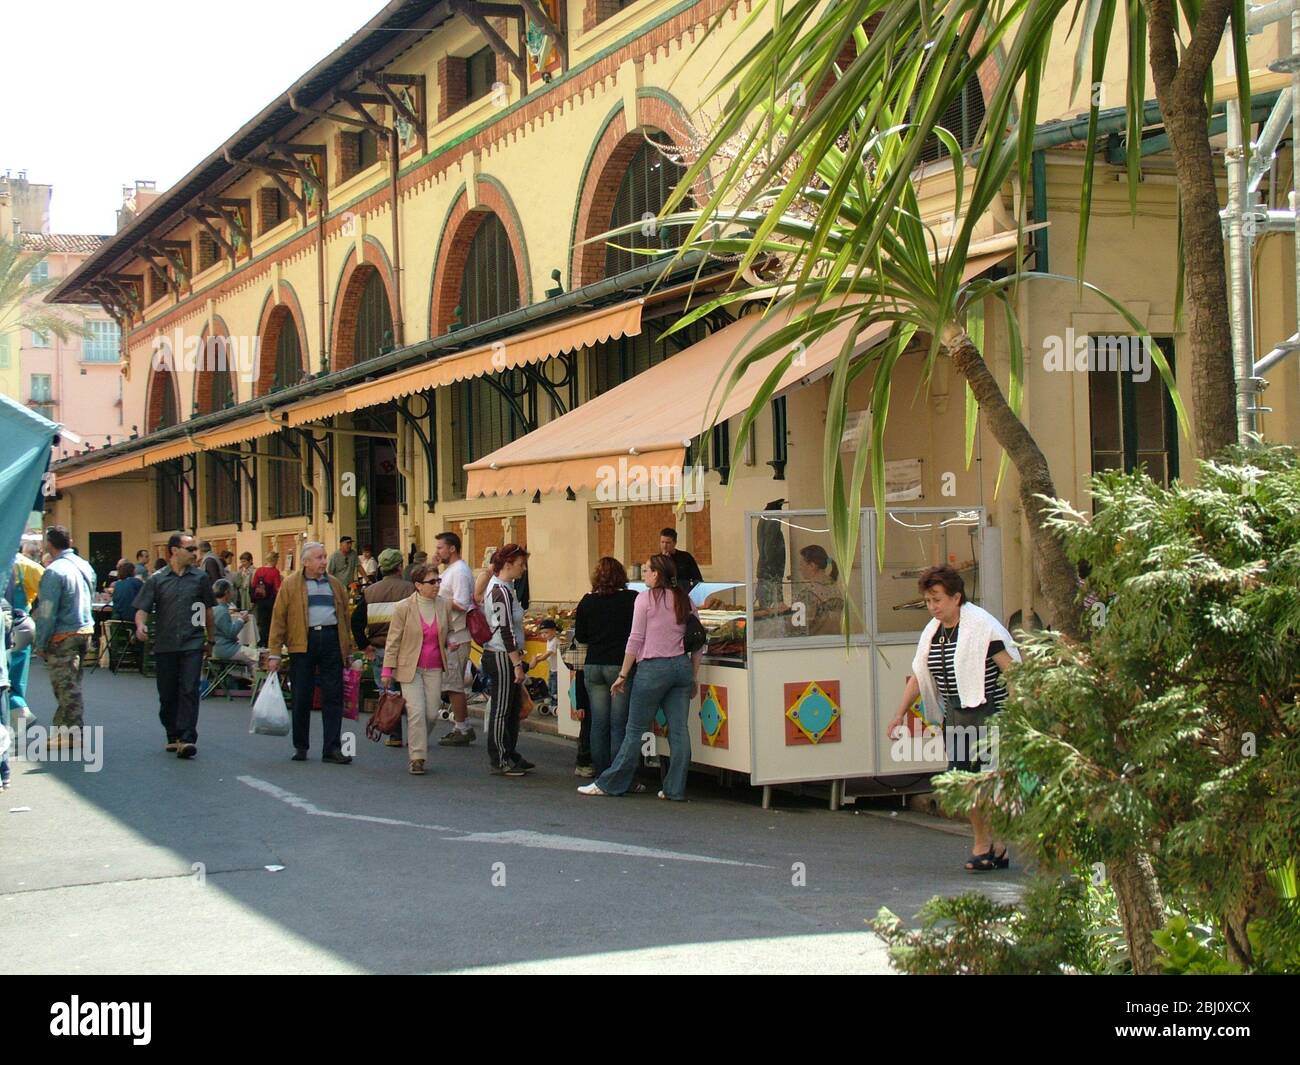 Outside the covered market in Menton, south of France - Stock Photo